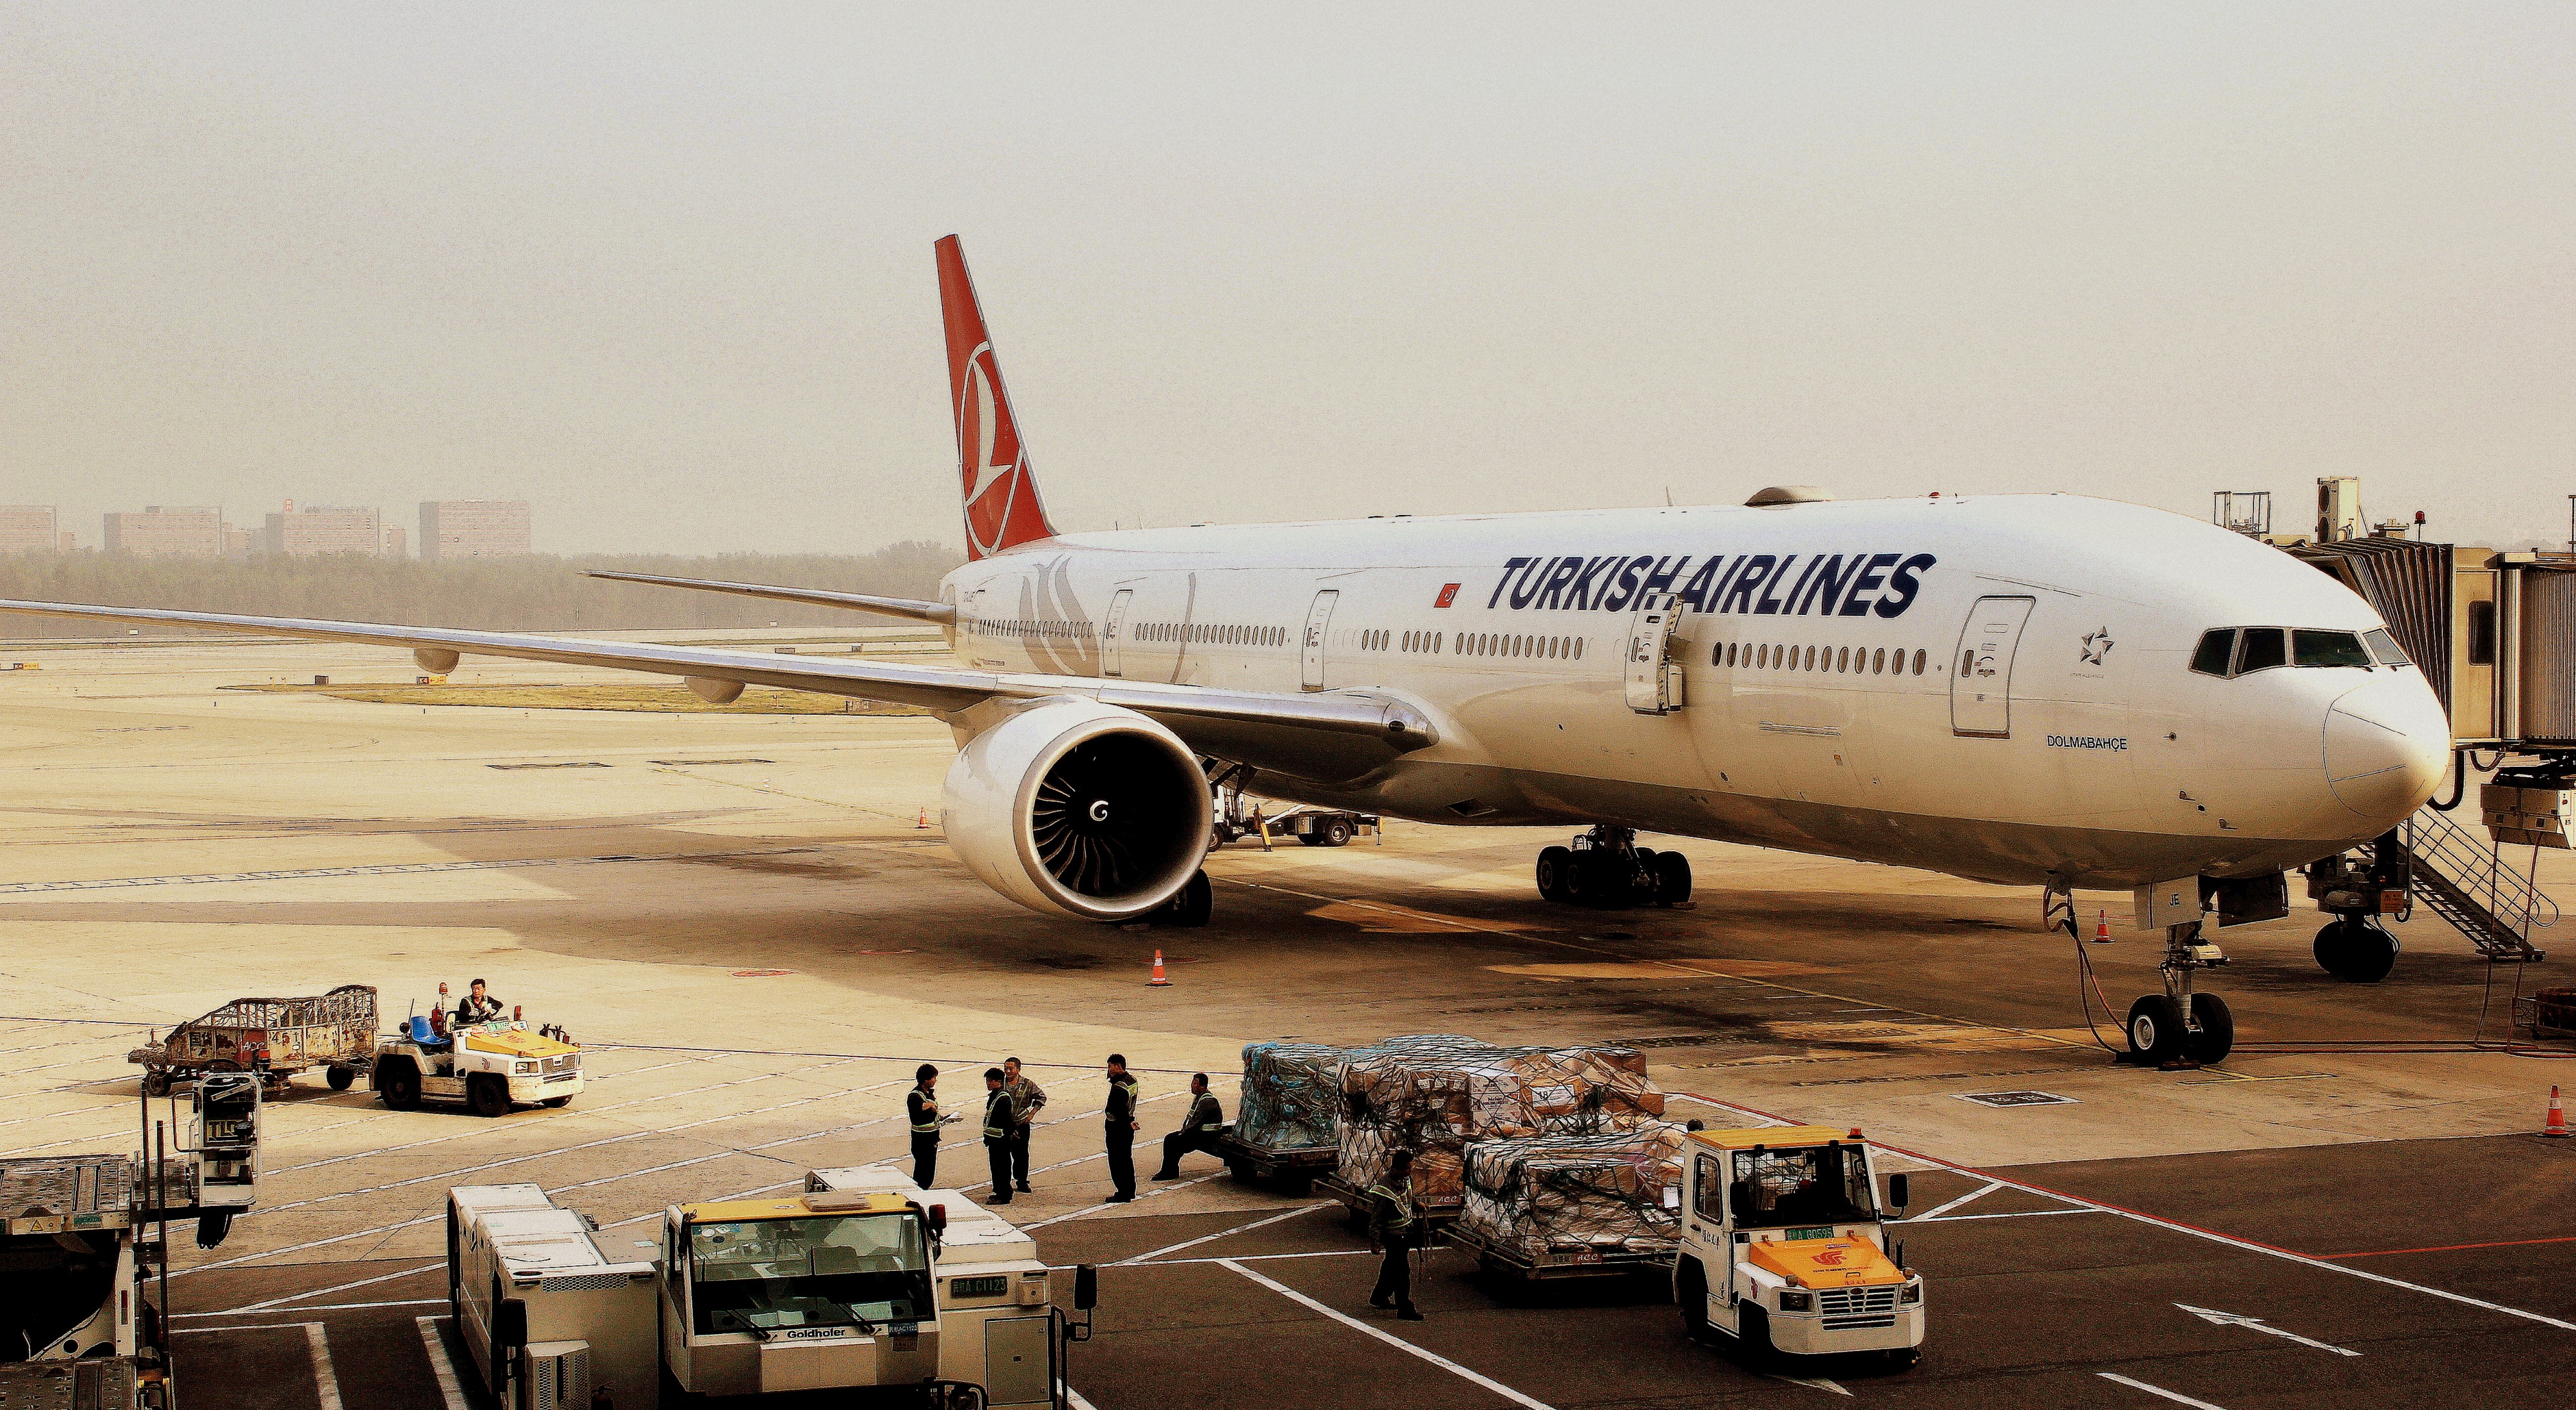 TURKISH AIRLINES BOEING 777-300 AT THE GATE AT BEIJING CAPITAL AIRPORT CHINA OCT 2012 (8169464879)